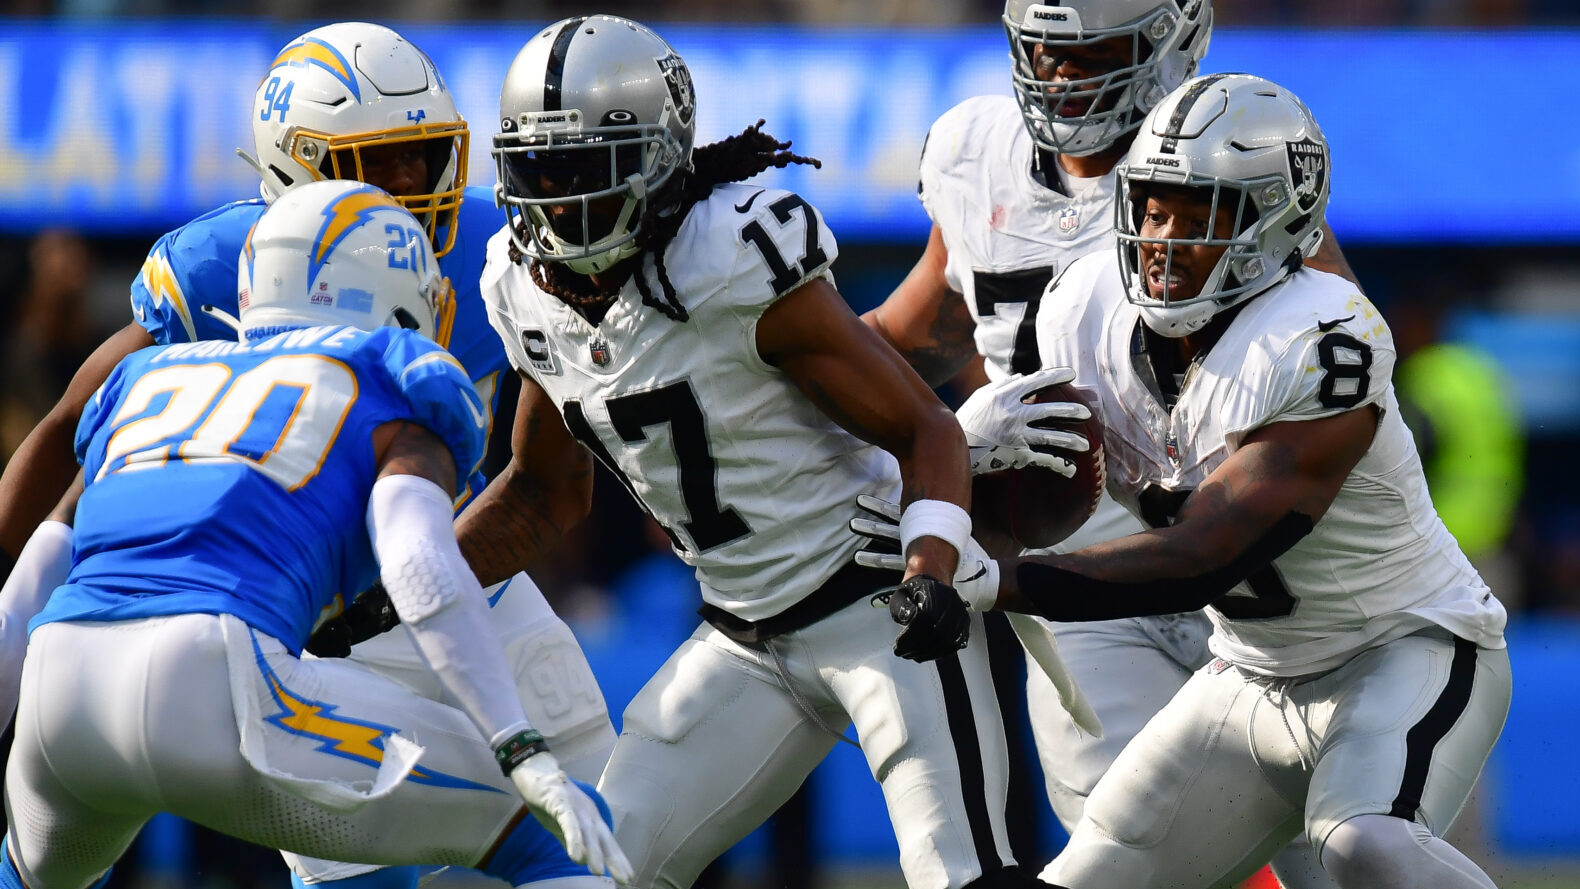 Davante Adams vs. the Chargers' Defense: Week 4 Matchup and Preview